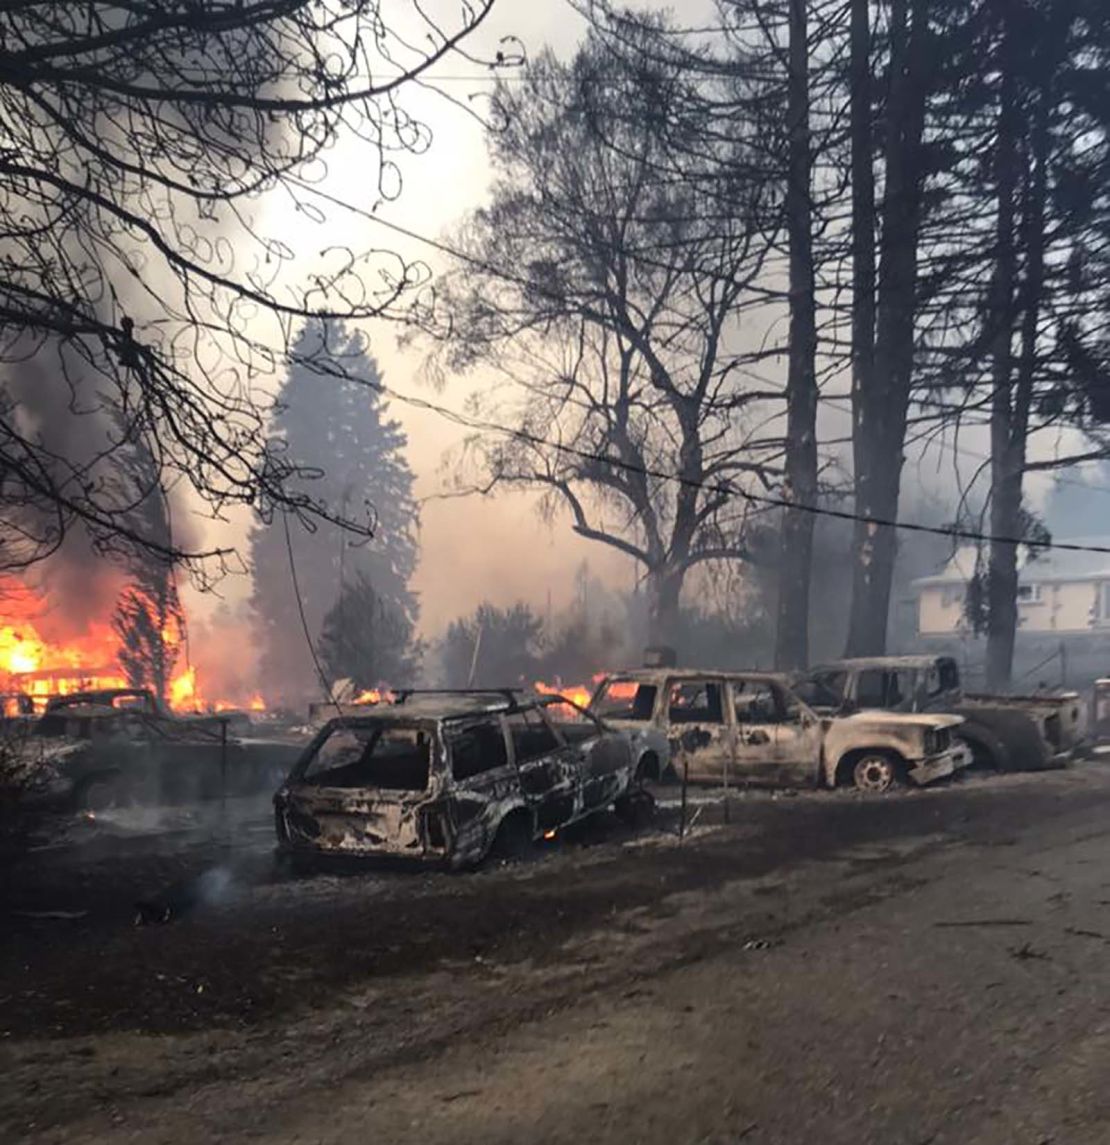 A fire destroyed 80% of Malden, Washington, the Whitman County Sheriff's Office, which posted this photo, reported.